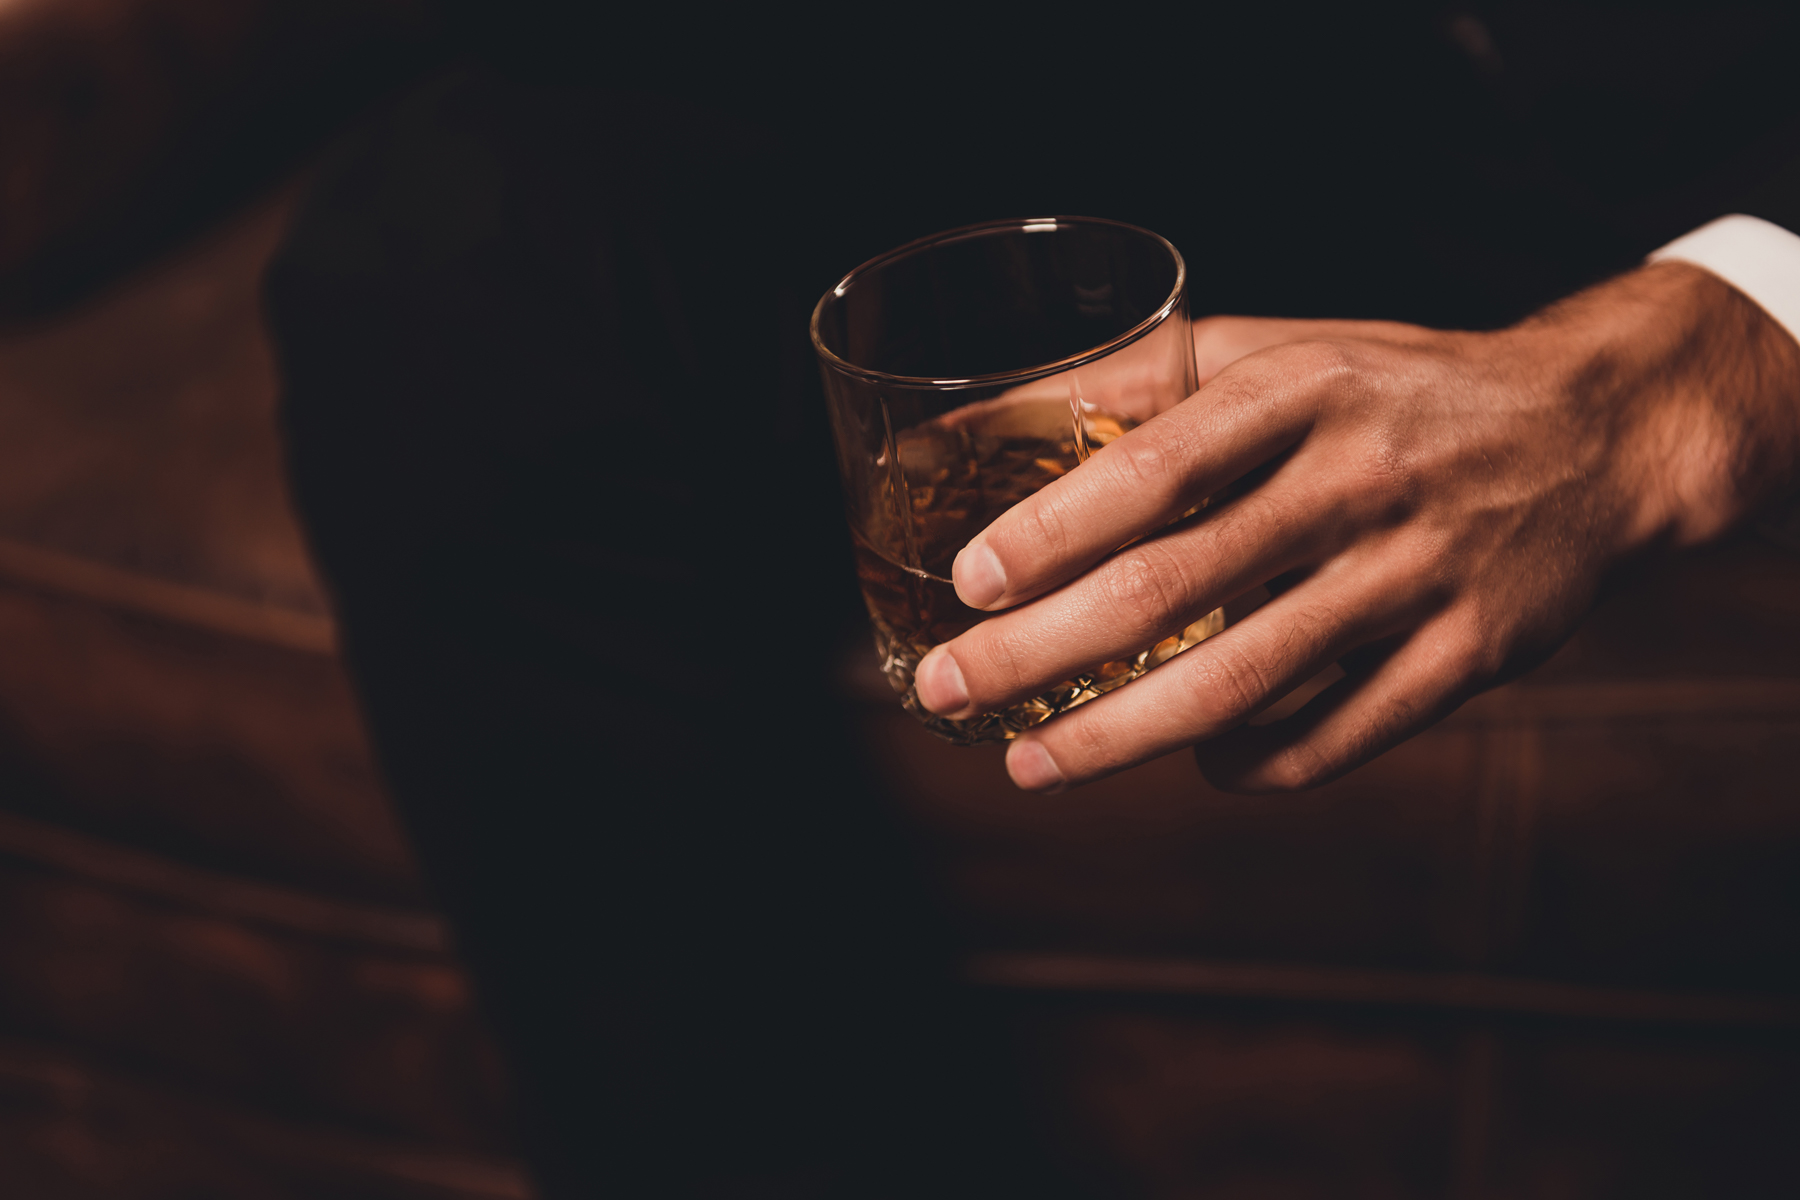 Man's hand holding a glass of whiskey